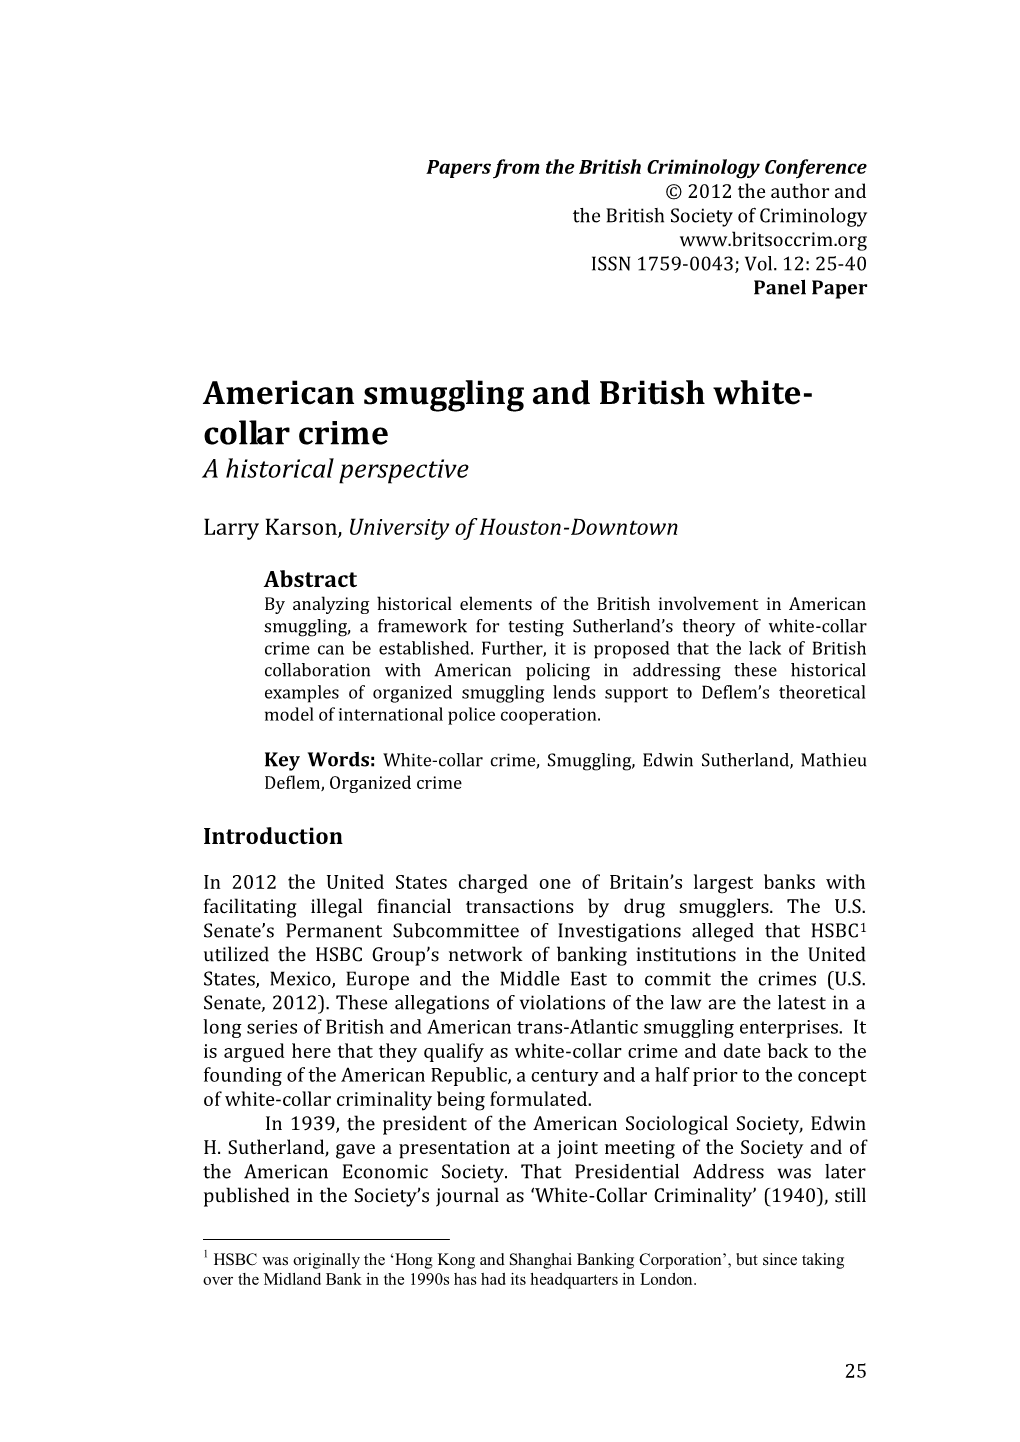 American Smuggling and British White-Collar Crime